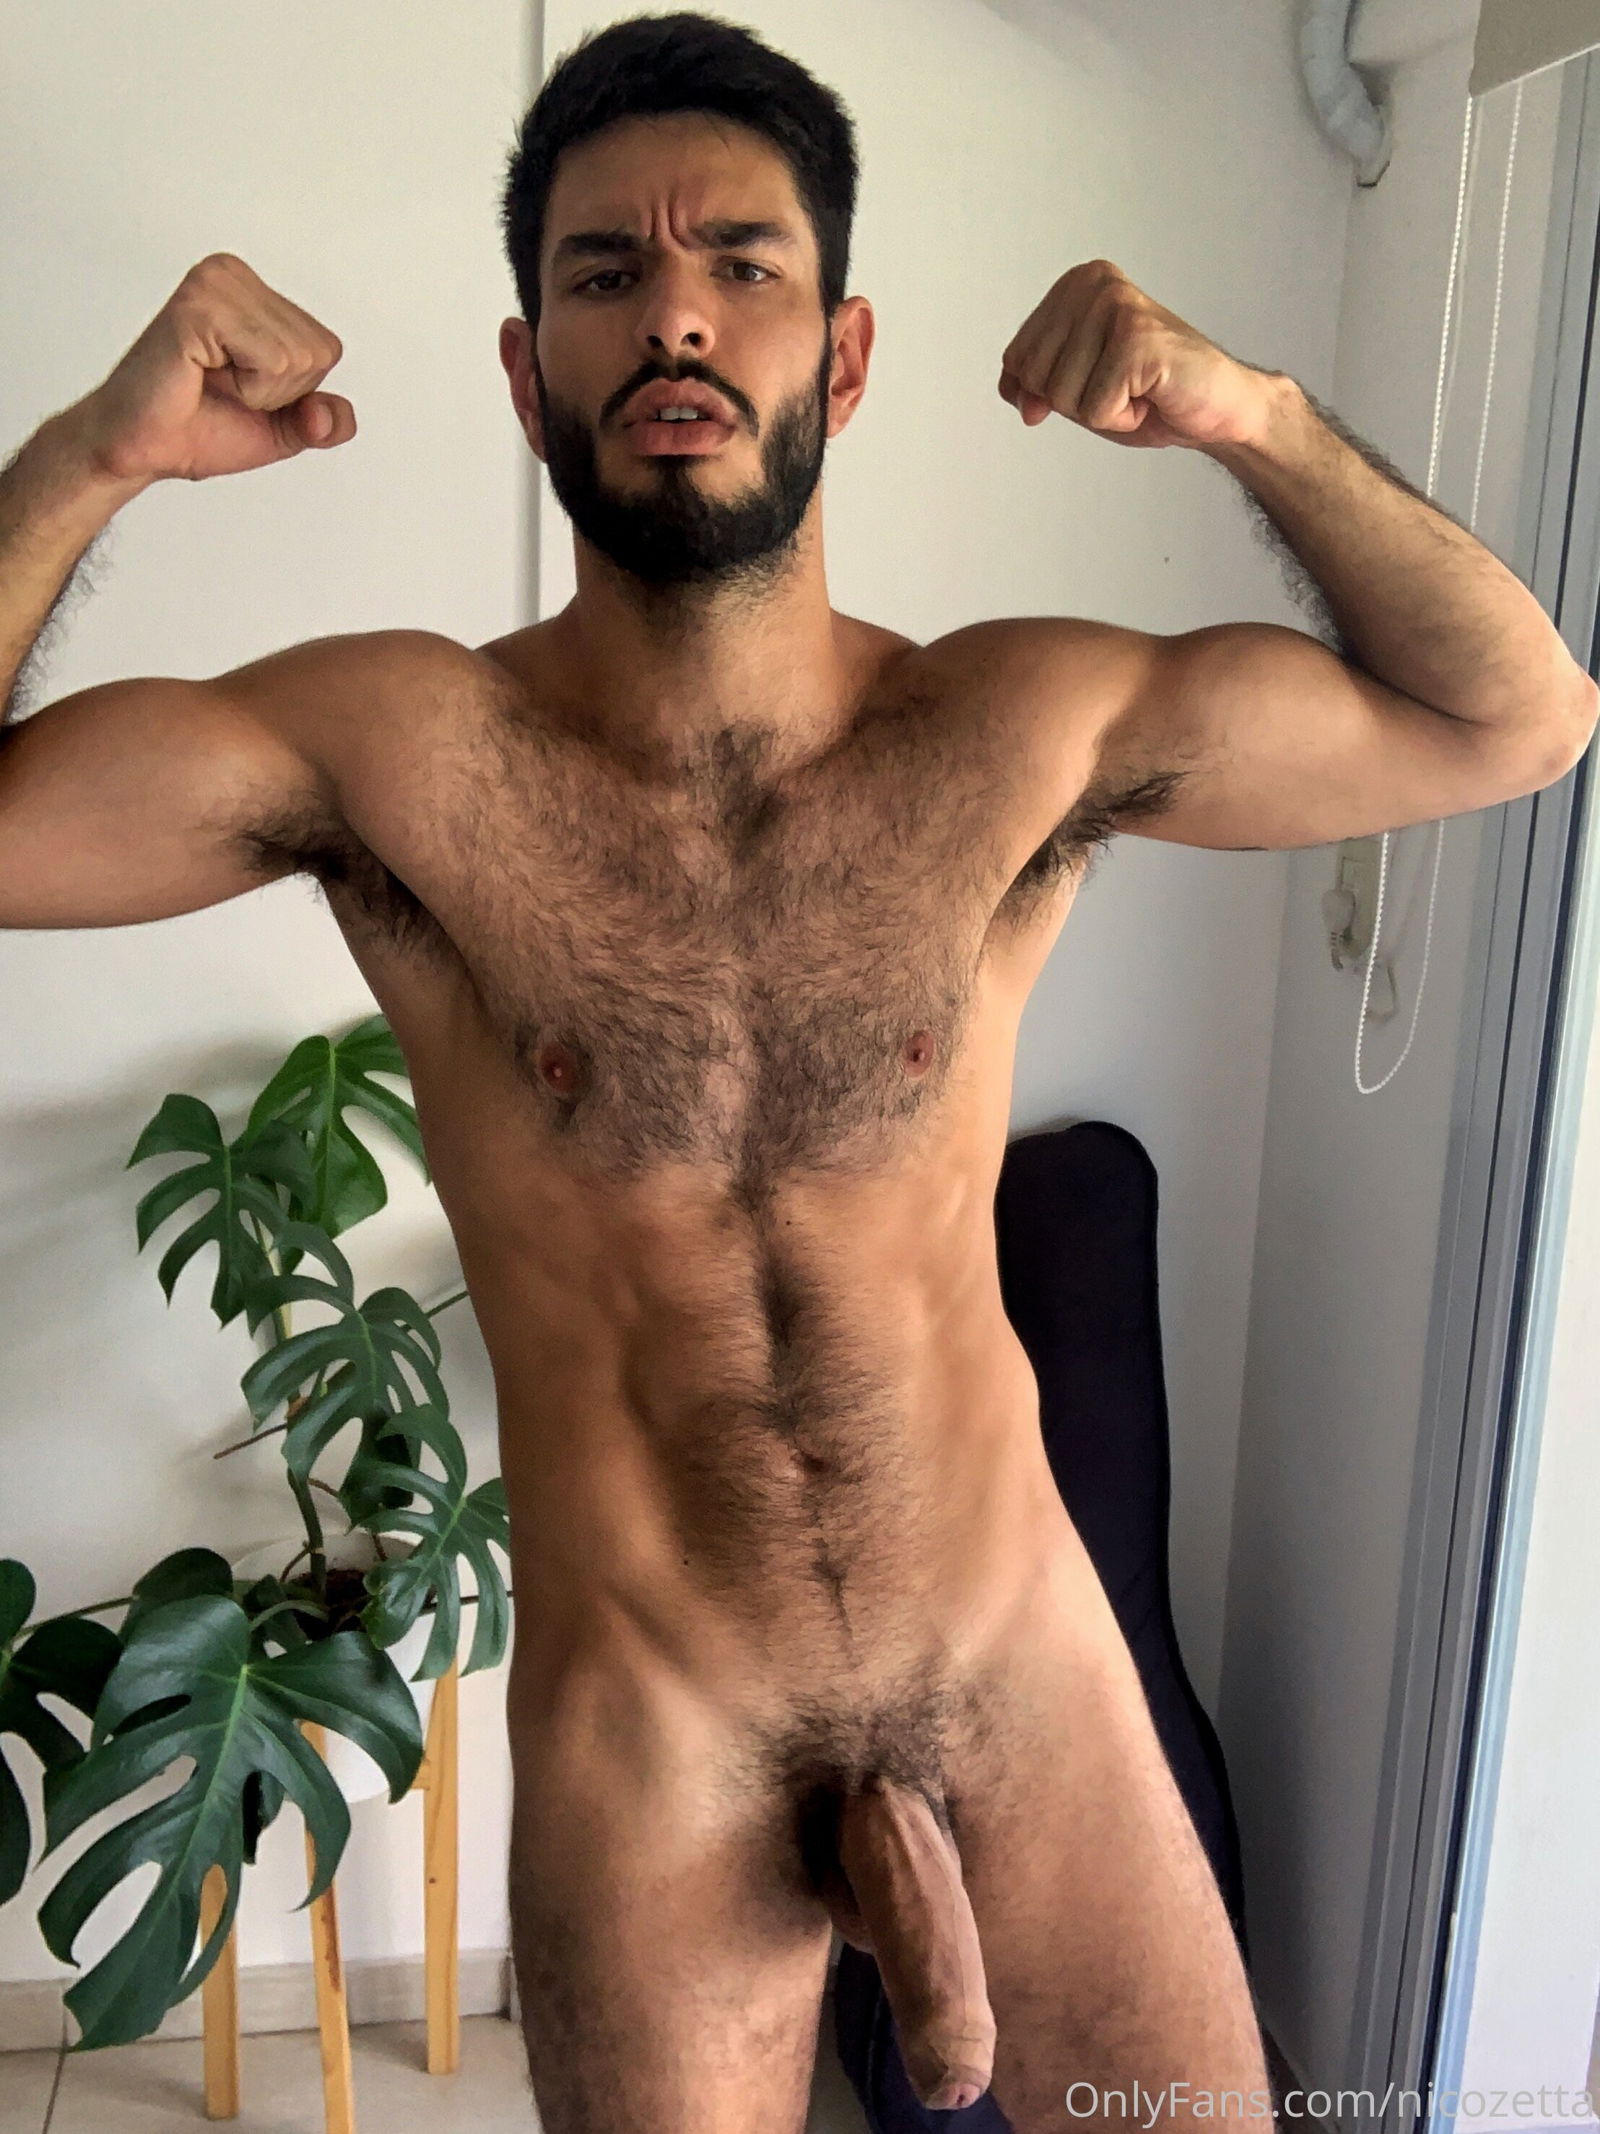 Watch the Photo by pmhu4242 with the username @pmhu4242, posted on January 18, 2022. The post is about the topic musclegay. and the text says '#musclegay #hunk #hung #sixpack'